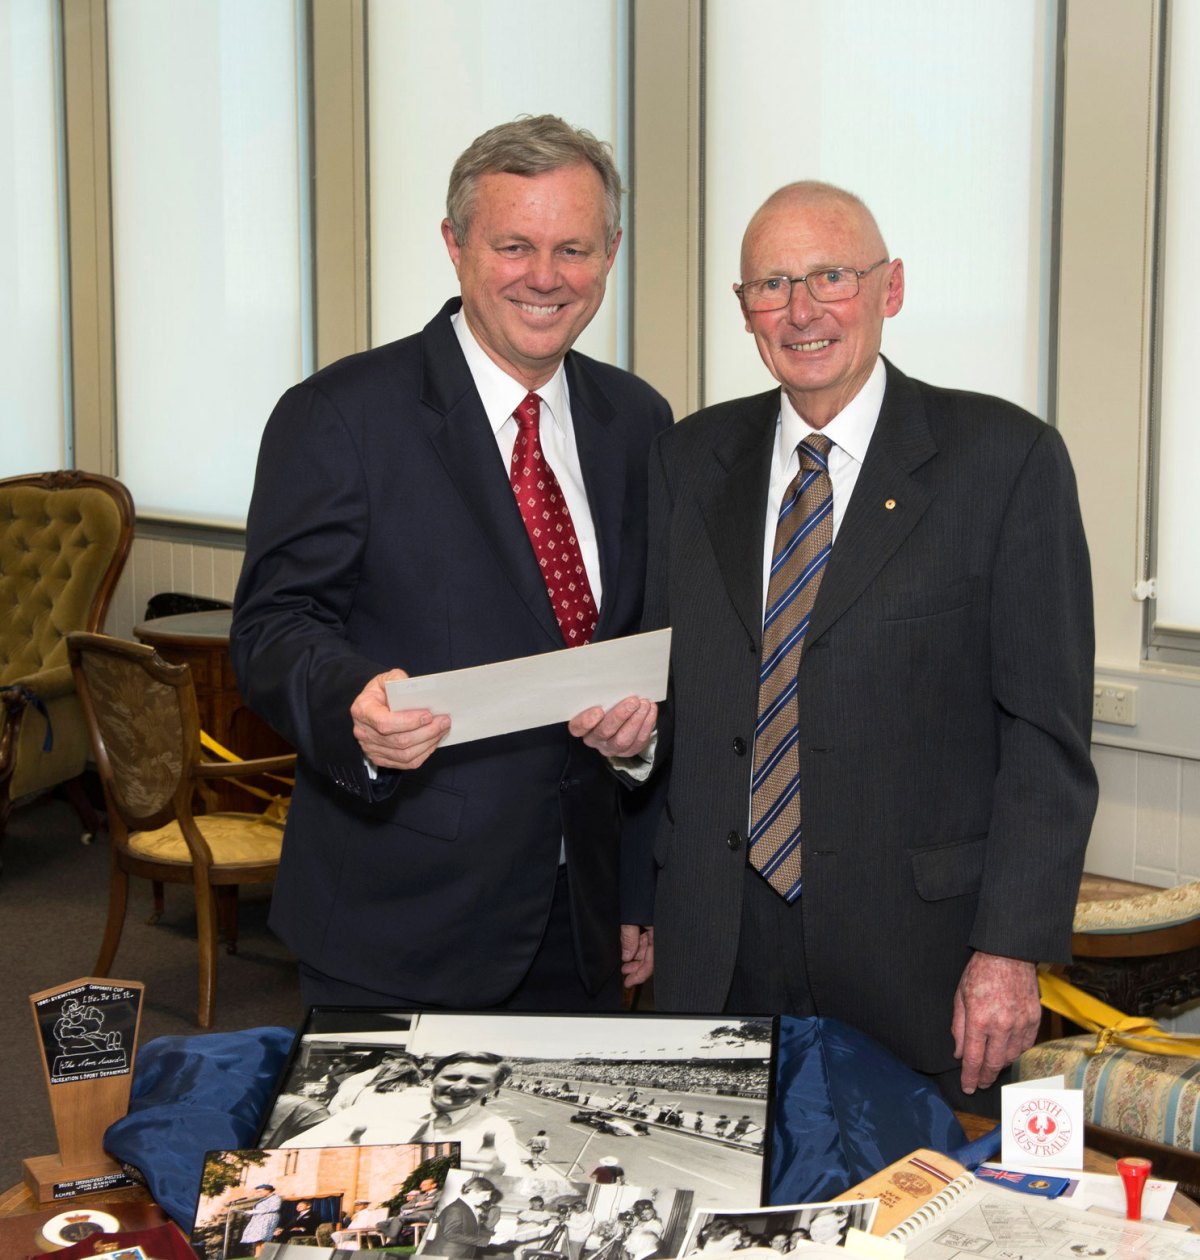 John Bannon (right) with Mike Rann at the launch of the Bannon Collection at Flinders University in 2012. Photo courtesy Flinders University.